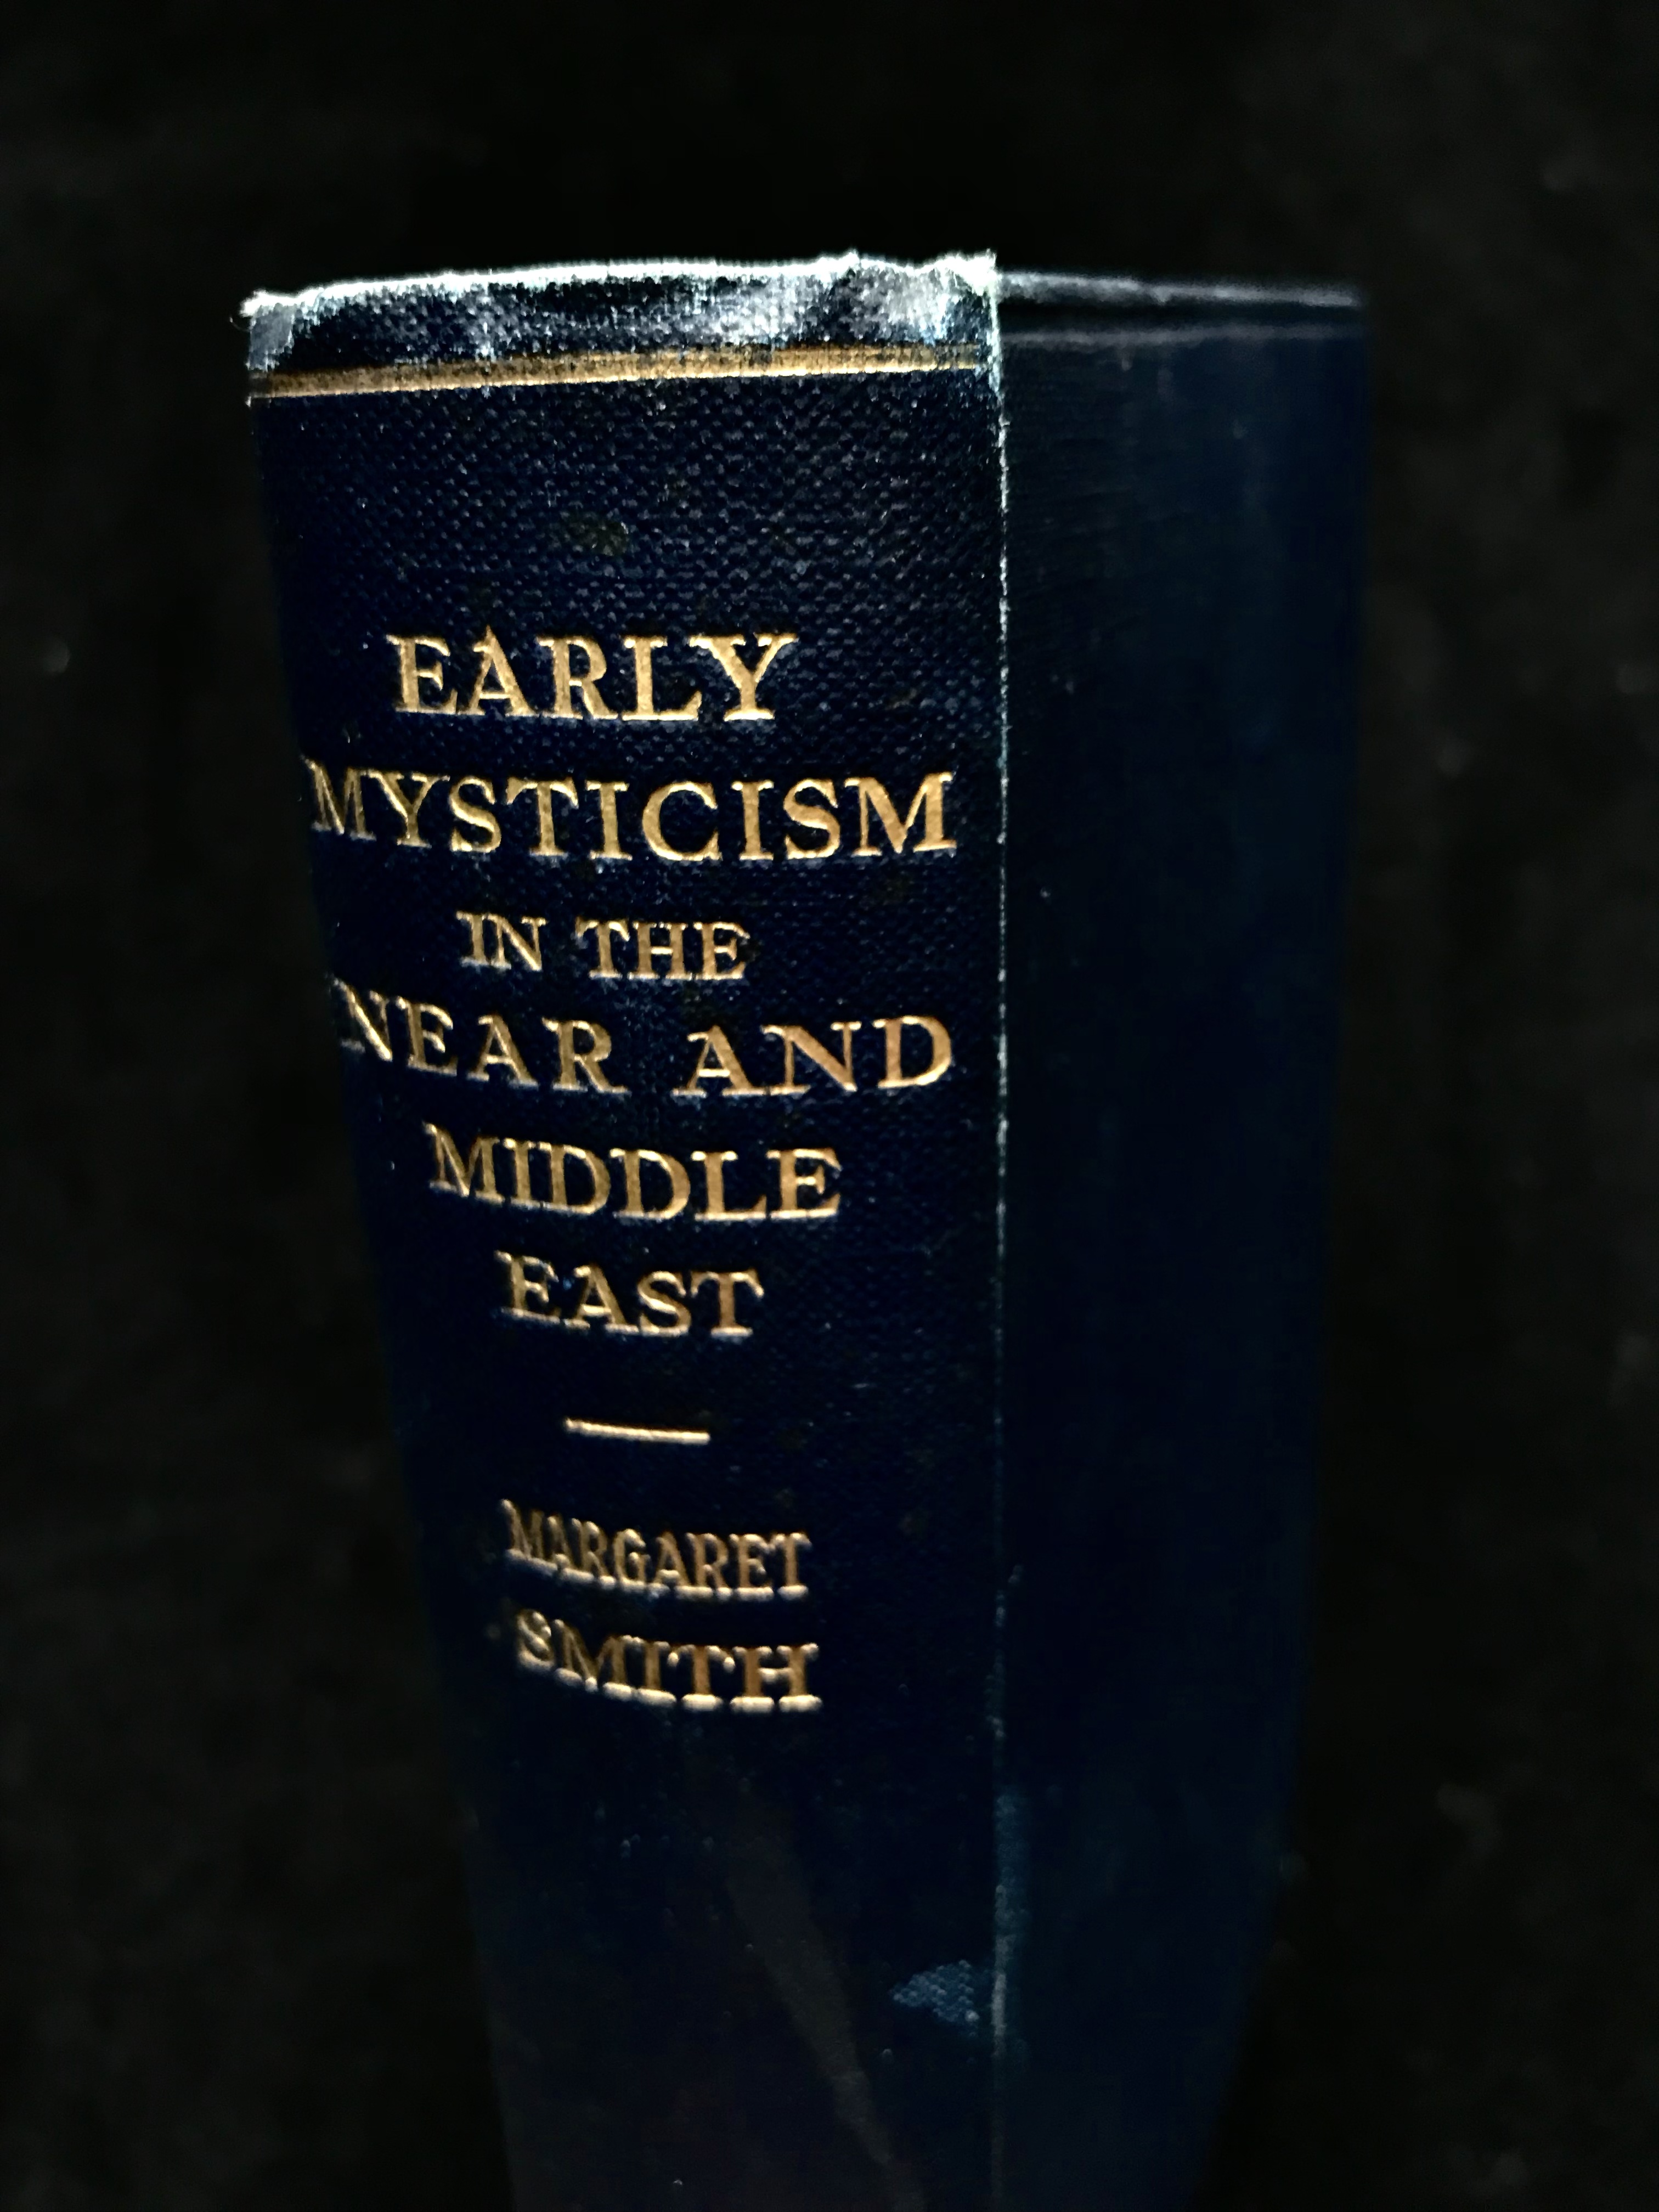 Early Mysticism In The Near And Middle East by Margaret Smith